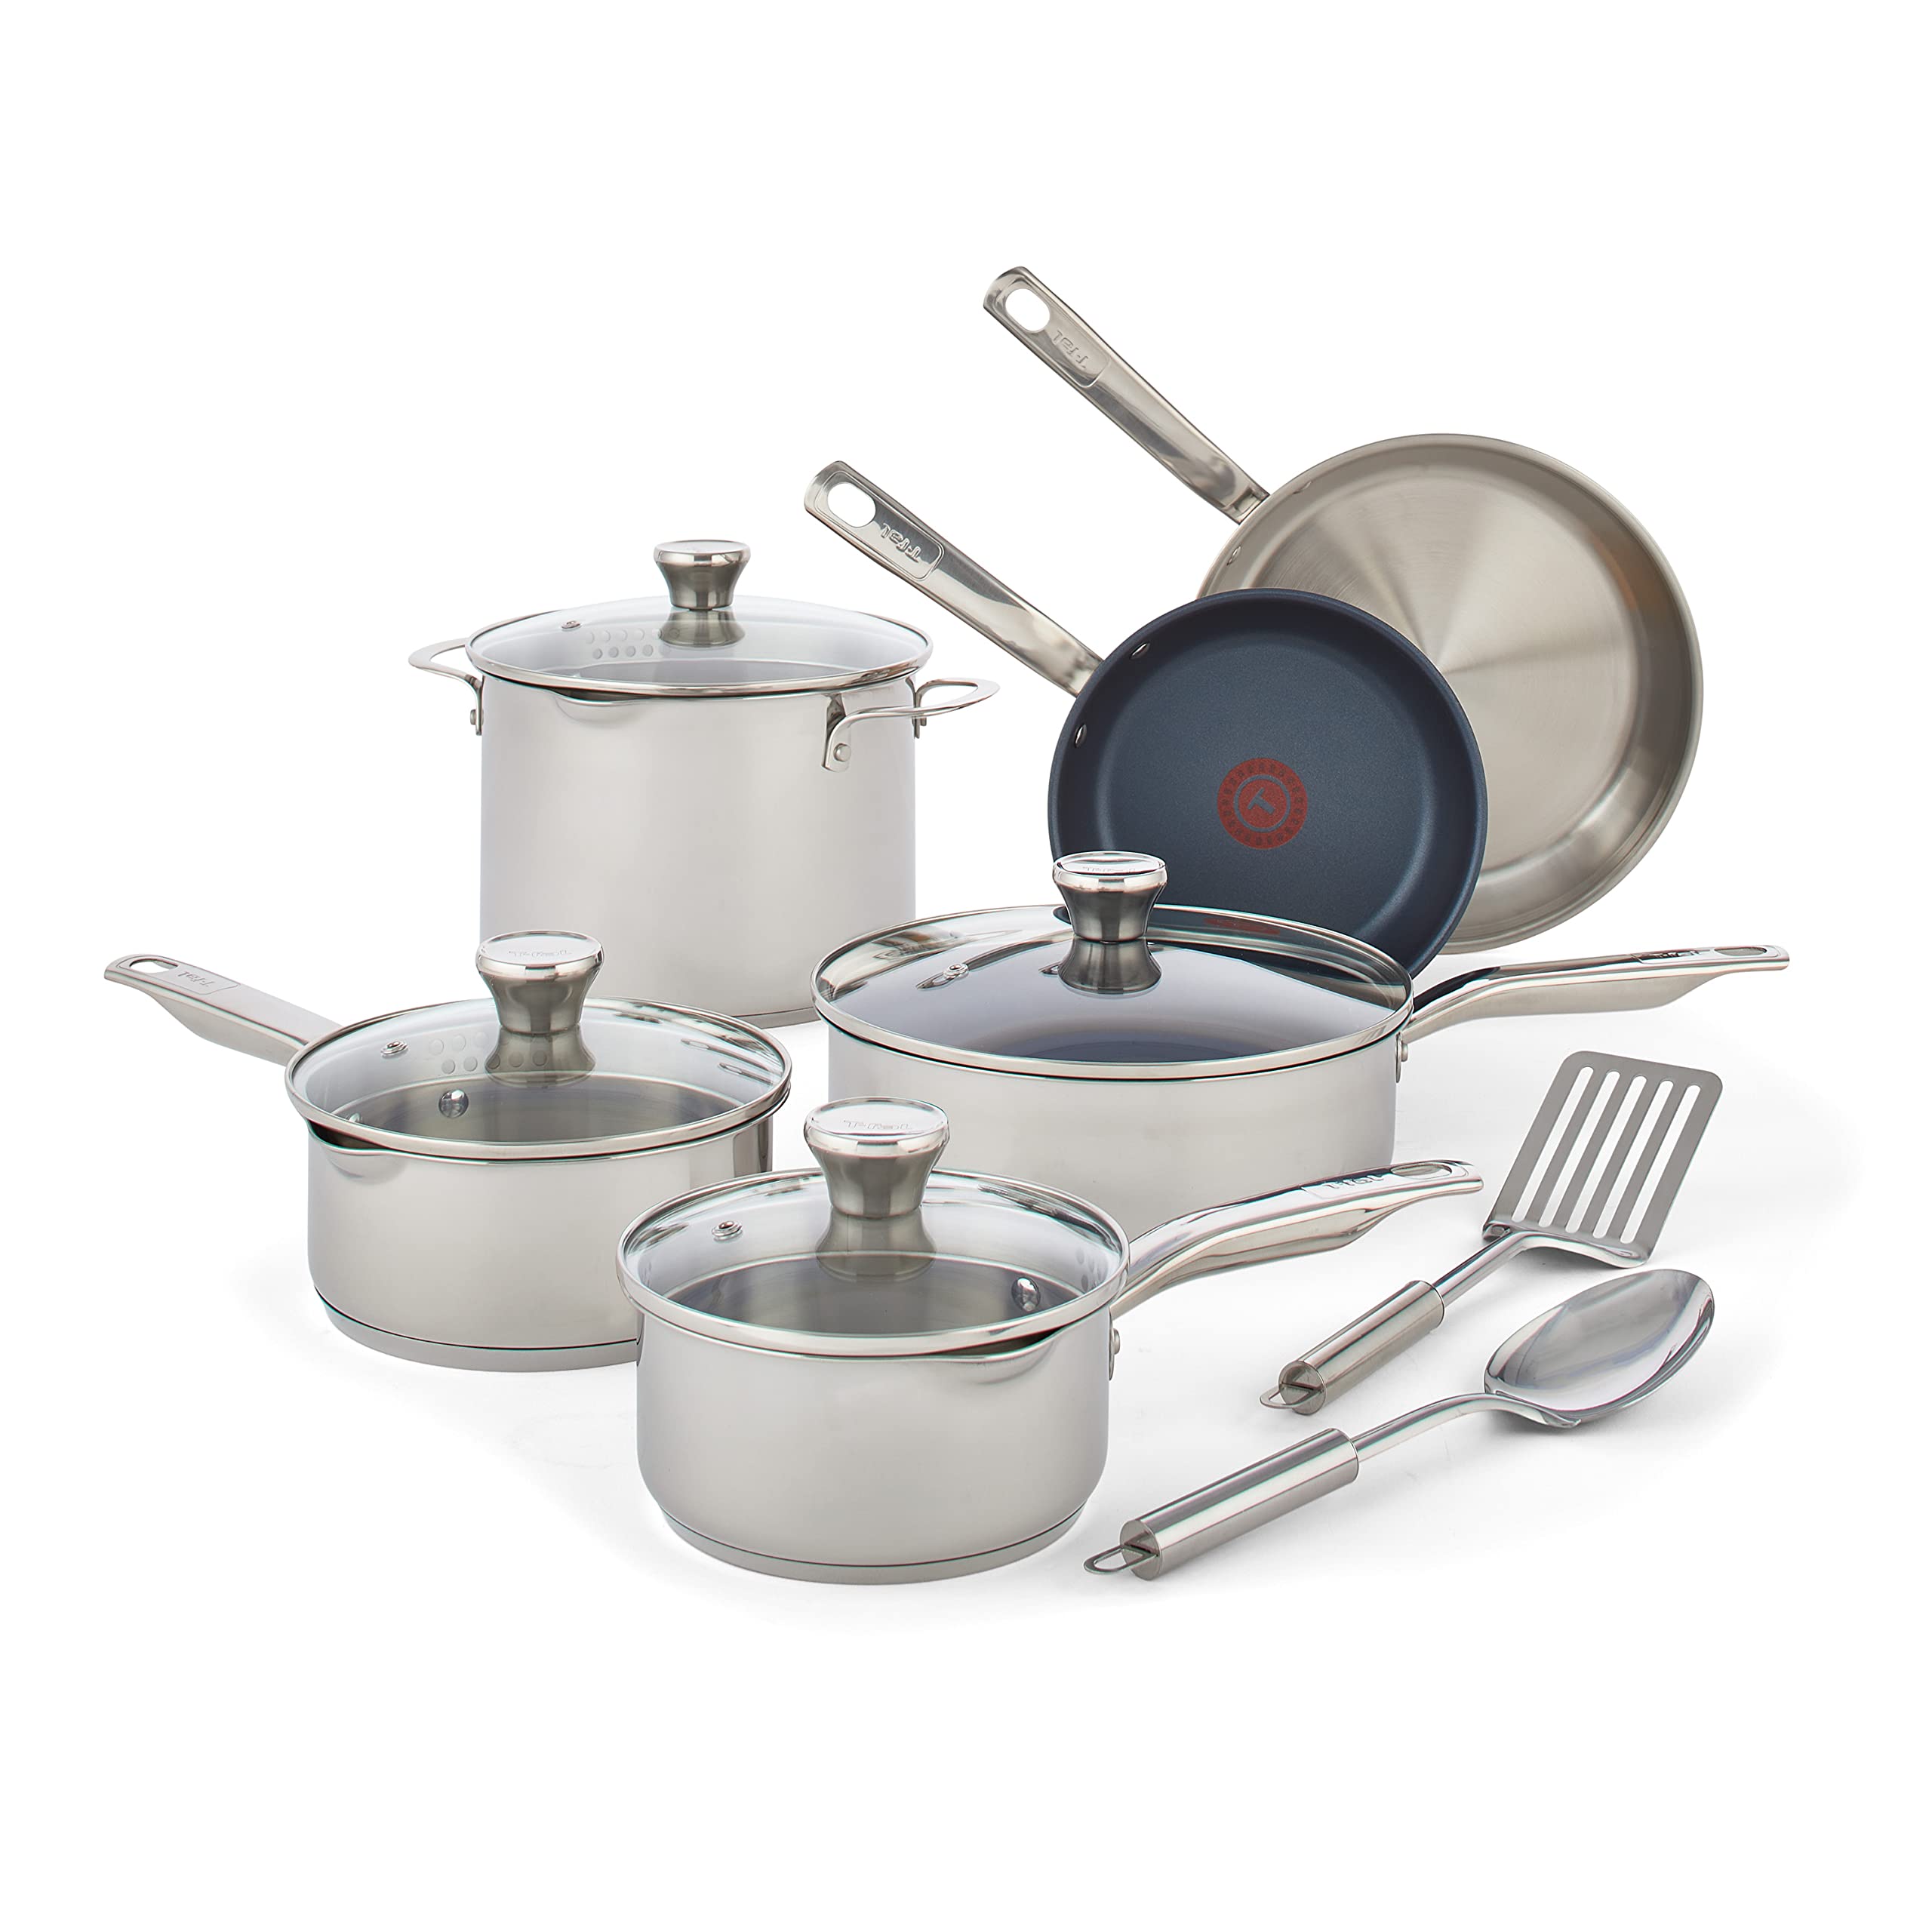 T-fal Platinum Stainless Steel with Nonstick Pan Cookware Set 12 Piece Induction Pots and Pans, Dishwasher Safe Silver